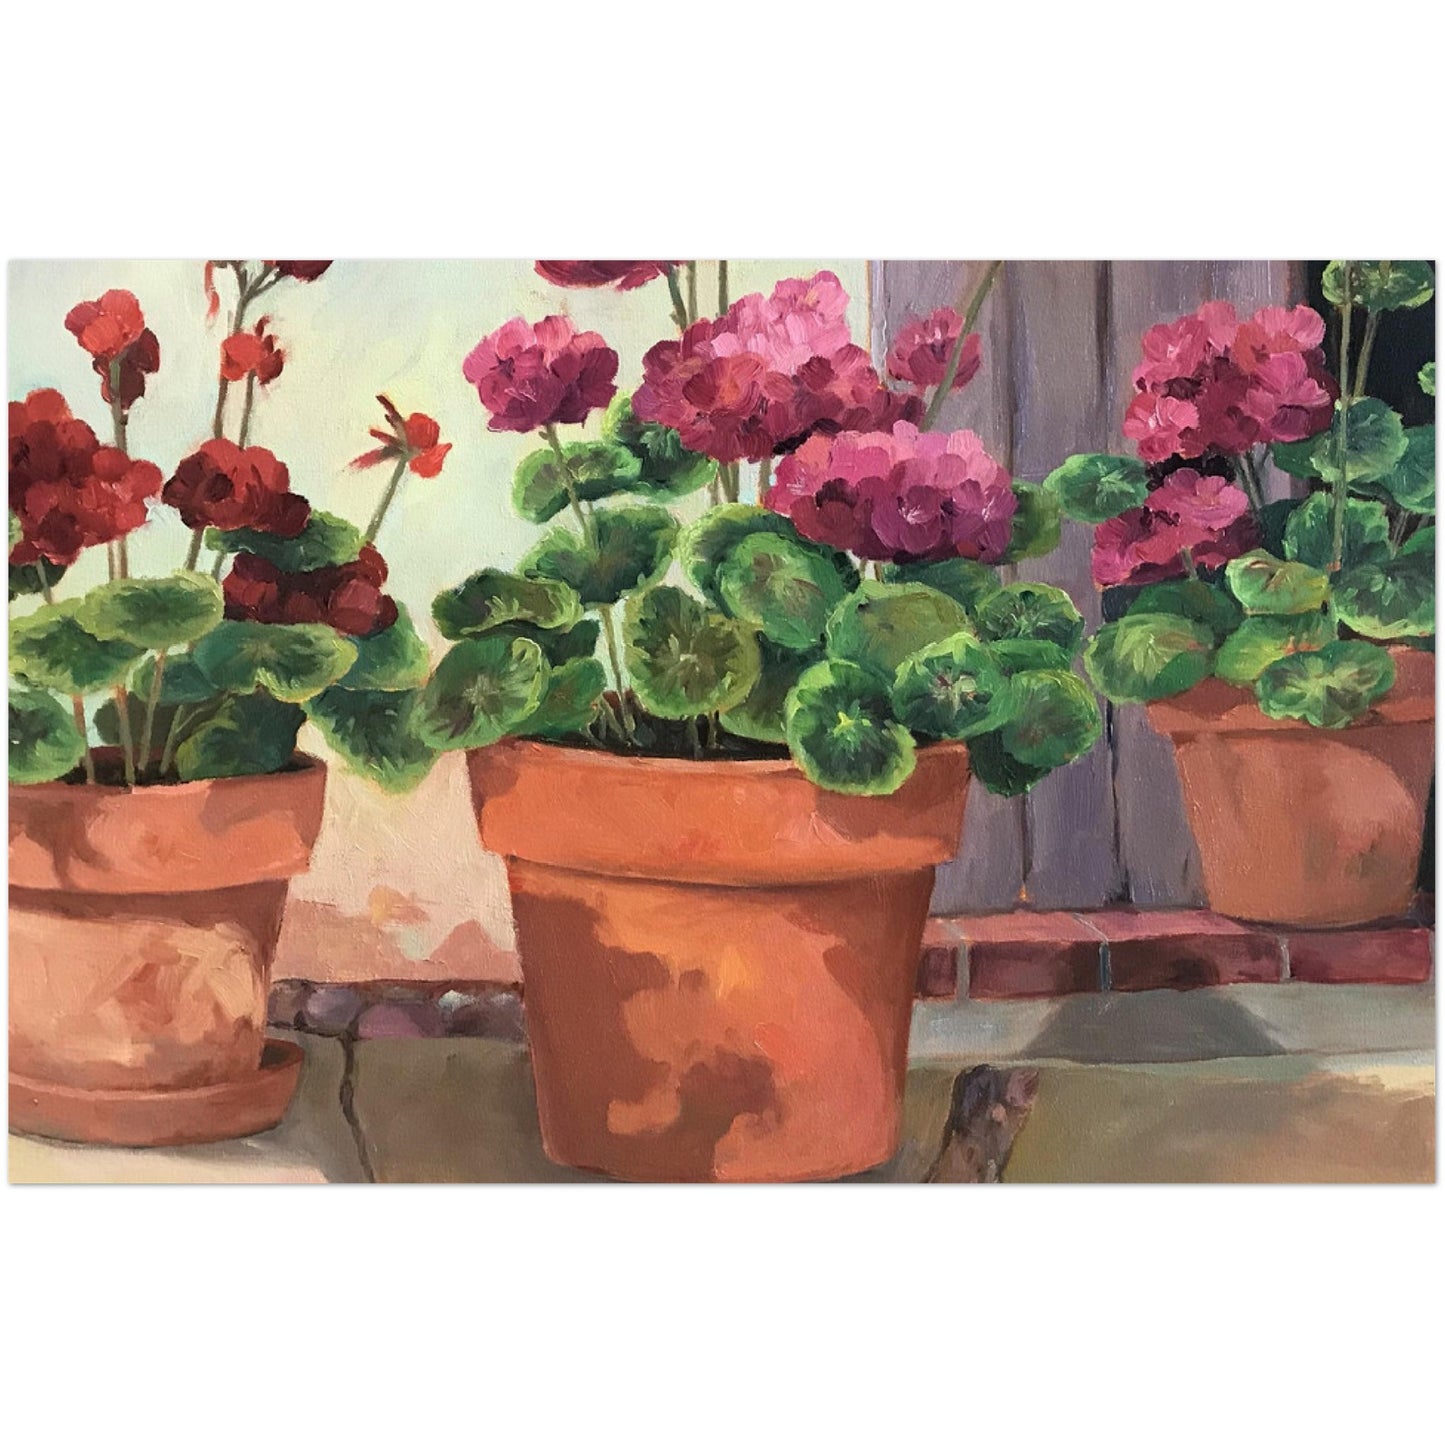 Pack of 10 postcards "Geraniums 2" (2-sided, No envelopes, US & CA) by Barbara Cleary Designs